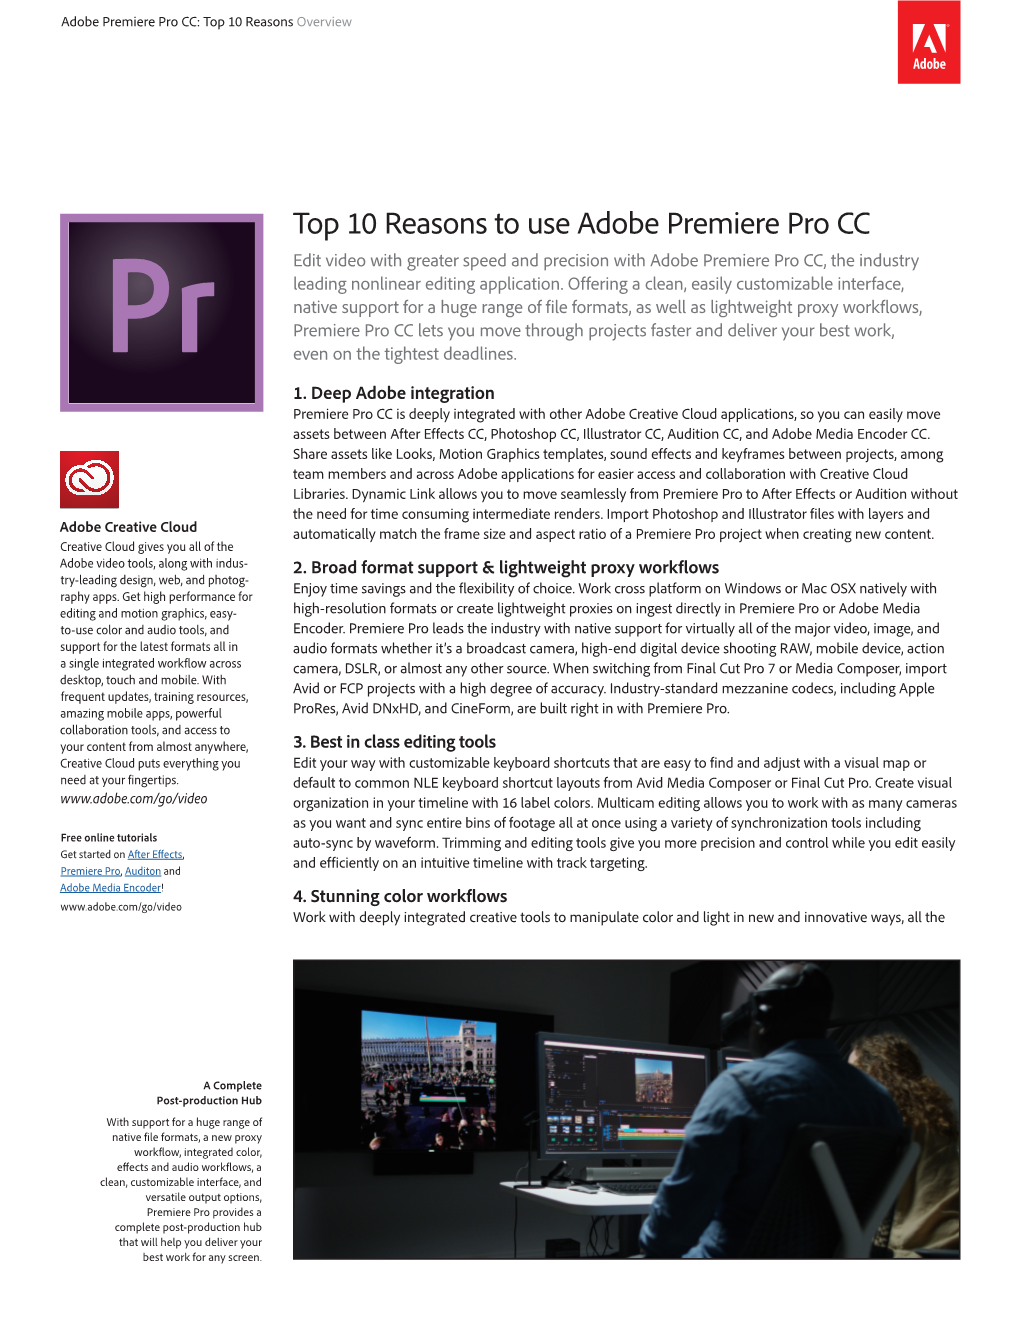 Top 10 Reasons to Use Adobe Premiere Pro CC Edit Video with Greater Speed and Precision with Adobe Premiere Pro CC, the Industry Leading Nonlinear Editing Application